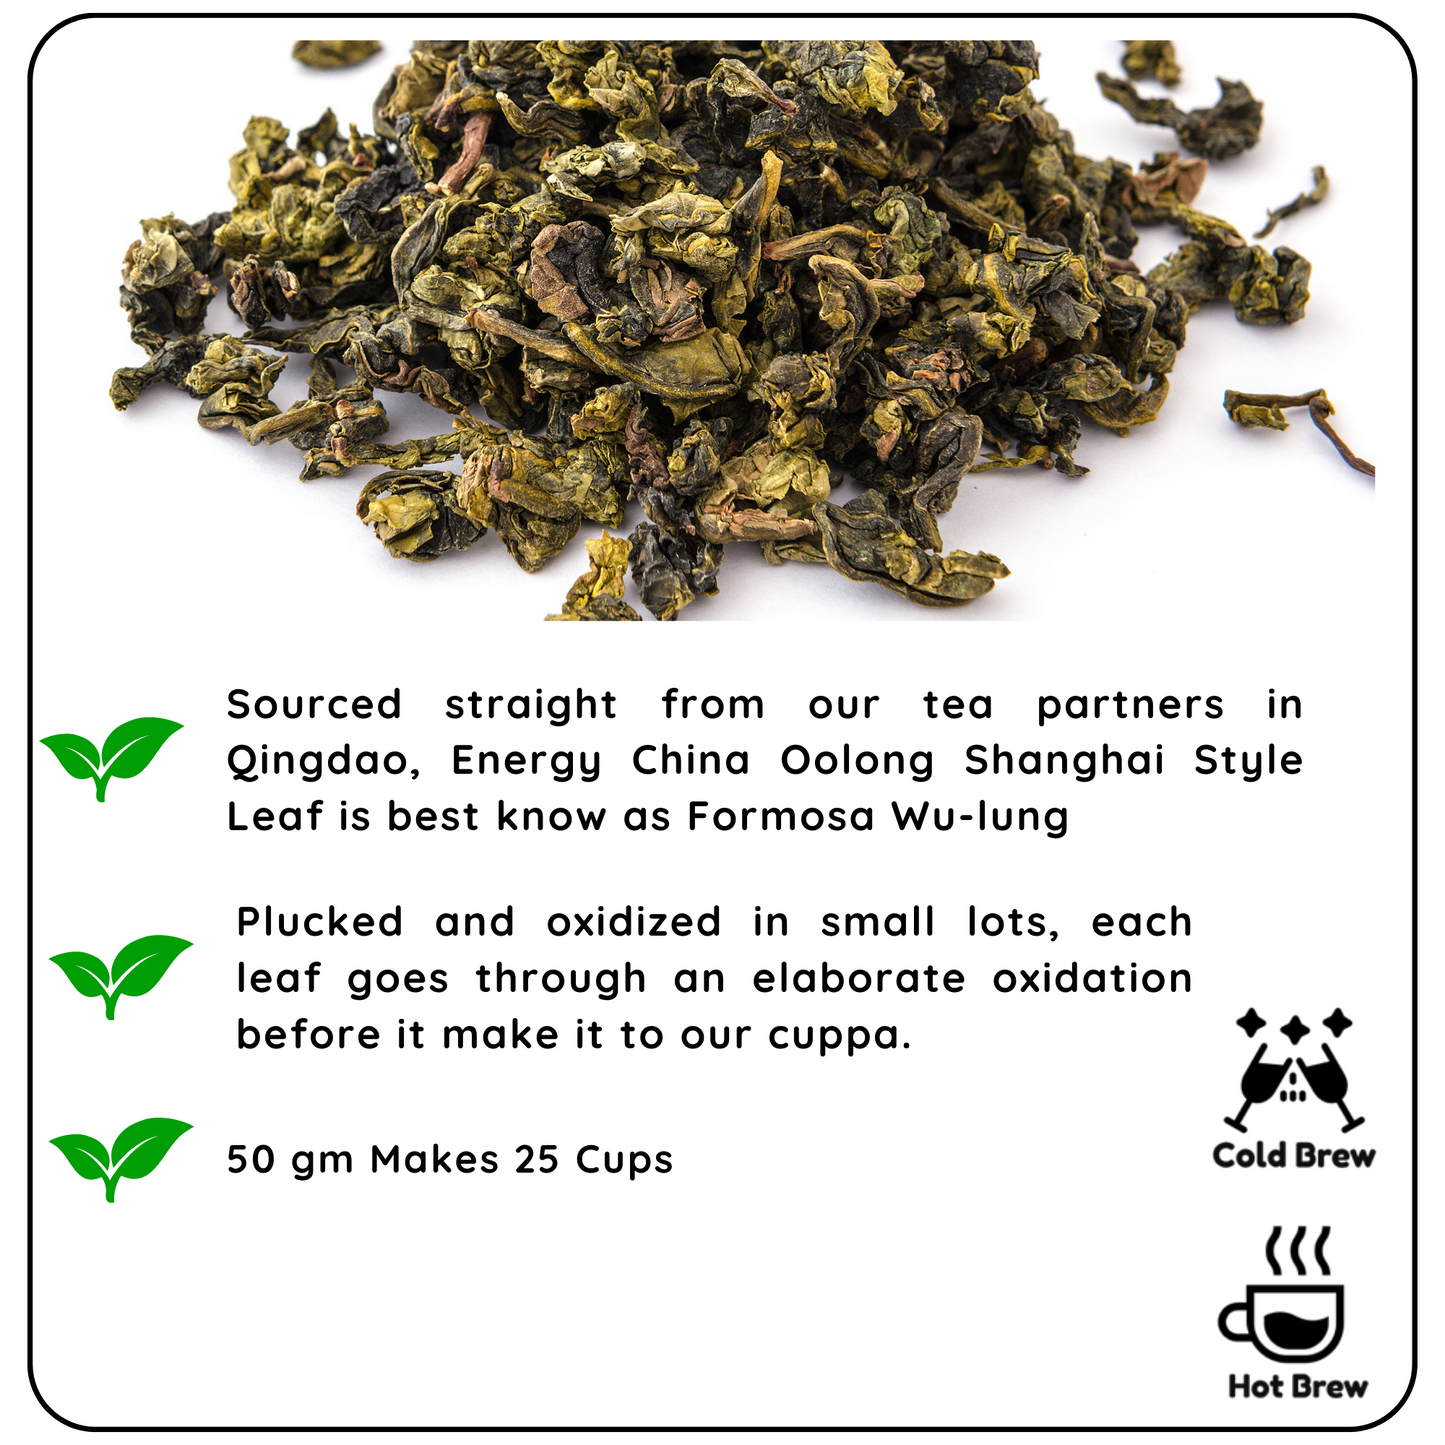 ENERGY China Oolong Shanghai Style Leaf - A Semi-Oxidized Tea for Boosting Metabolism and Relaxation - Radhikas Fine Teas and Whatnots